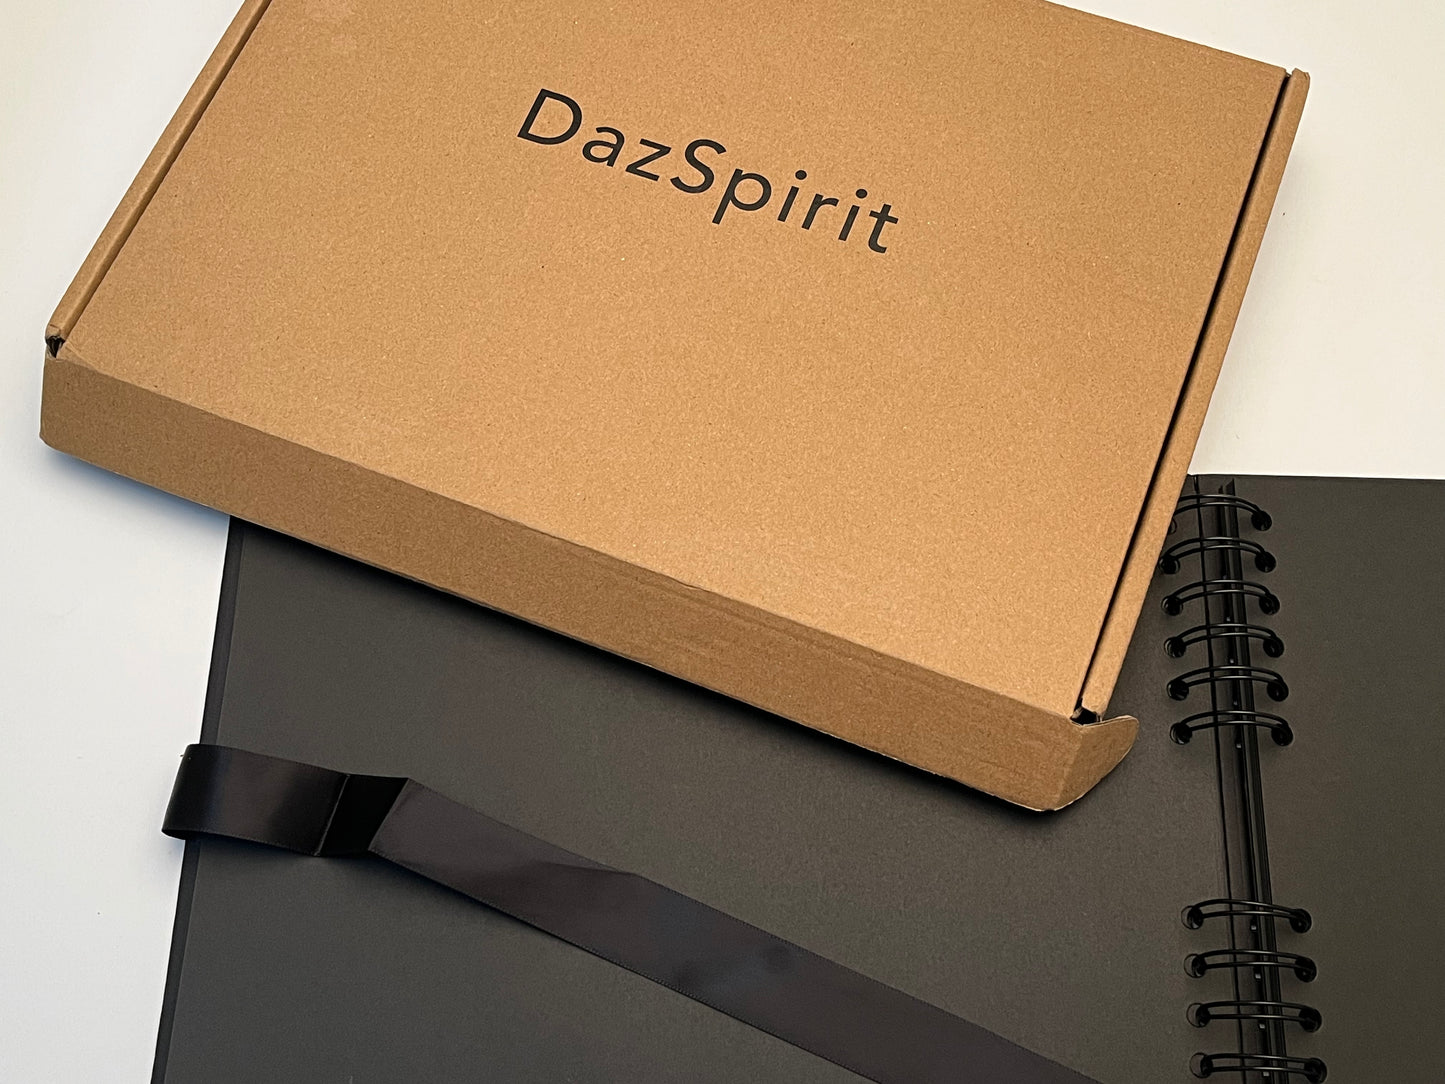 DazSpirit Customizable Scrapbook Photo Album with 12 Metallic Marker Pens, 80 Pages of Black Cardboard with Sturdy Hard Cover and Rust-Free Binding, Special Customizable Gift for Your Loved Ones